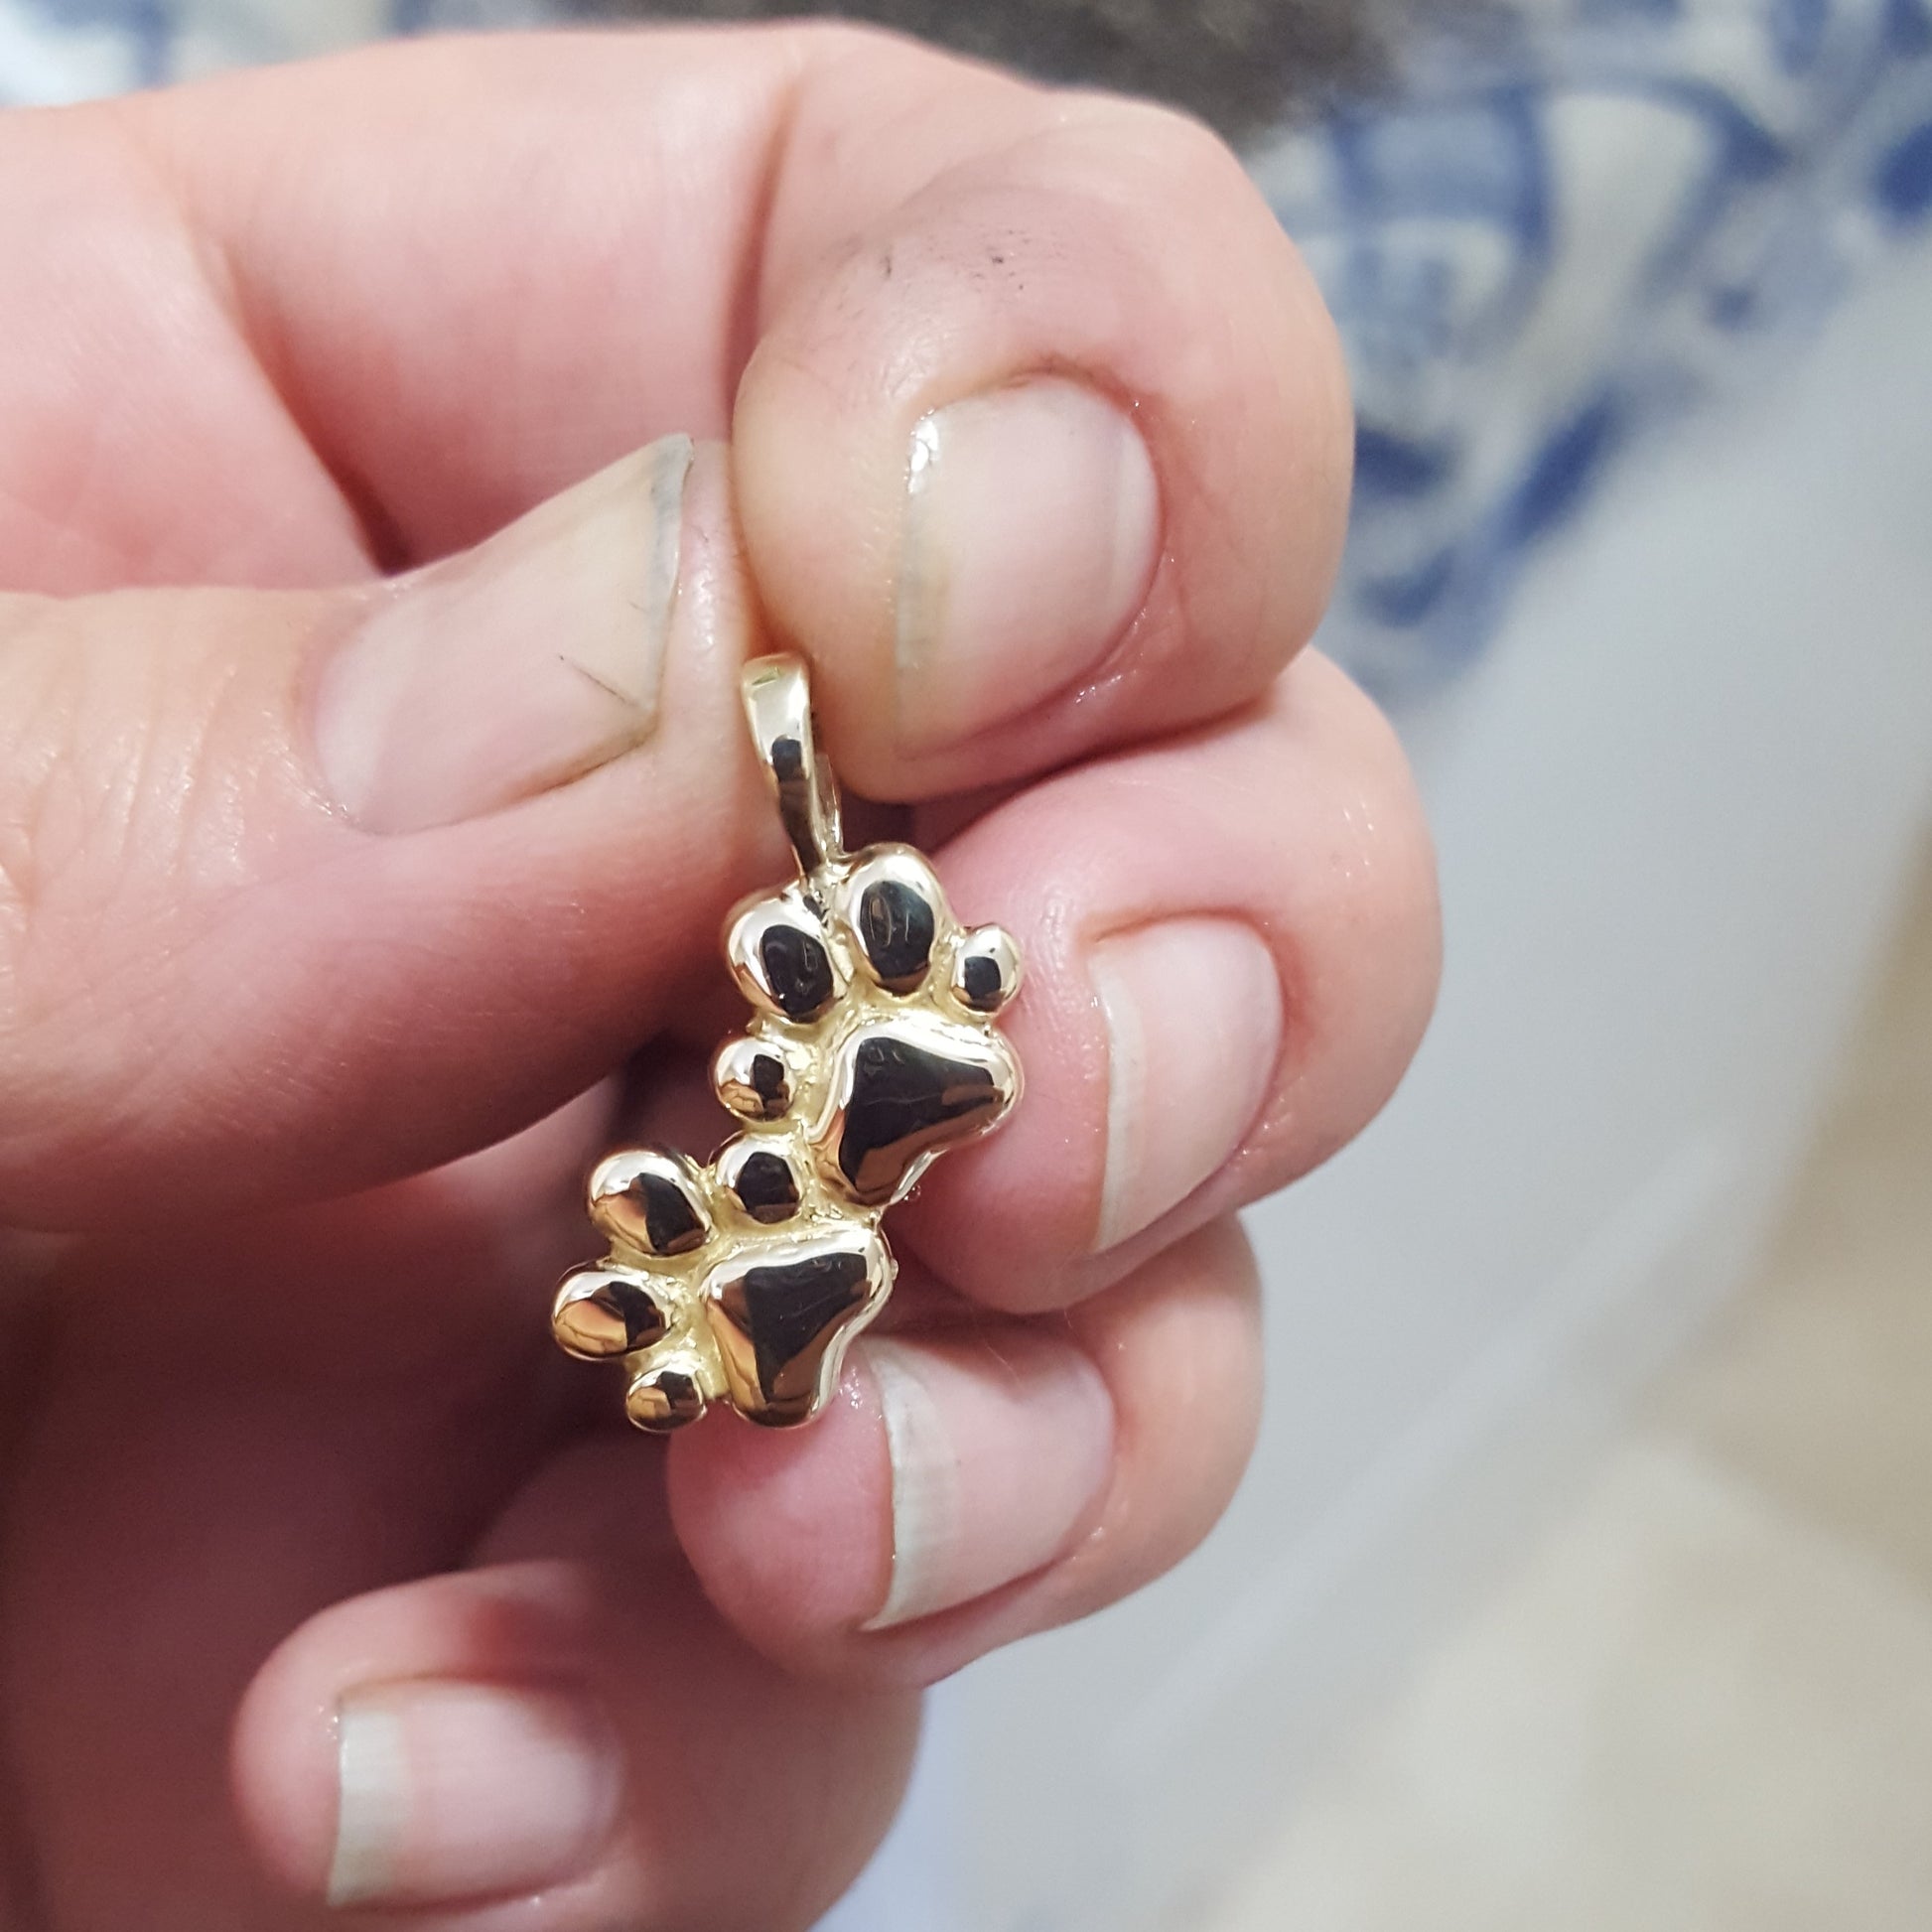 Small Paw Print Charm Pendant in Gold, Dog Paw Charm Pendant, Cat Paw Charm Pendant, Paw Print Charm Necklace, Gift For Pet Owners, Gold Cat Paw Pendant, Gold Dog Paw Pendant, Gold Paw Print Pendant, Gold Toe Beans Pendant, Gold Paw Print Charm